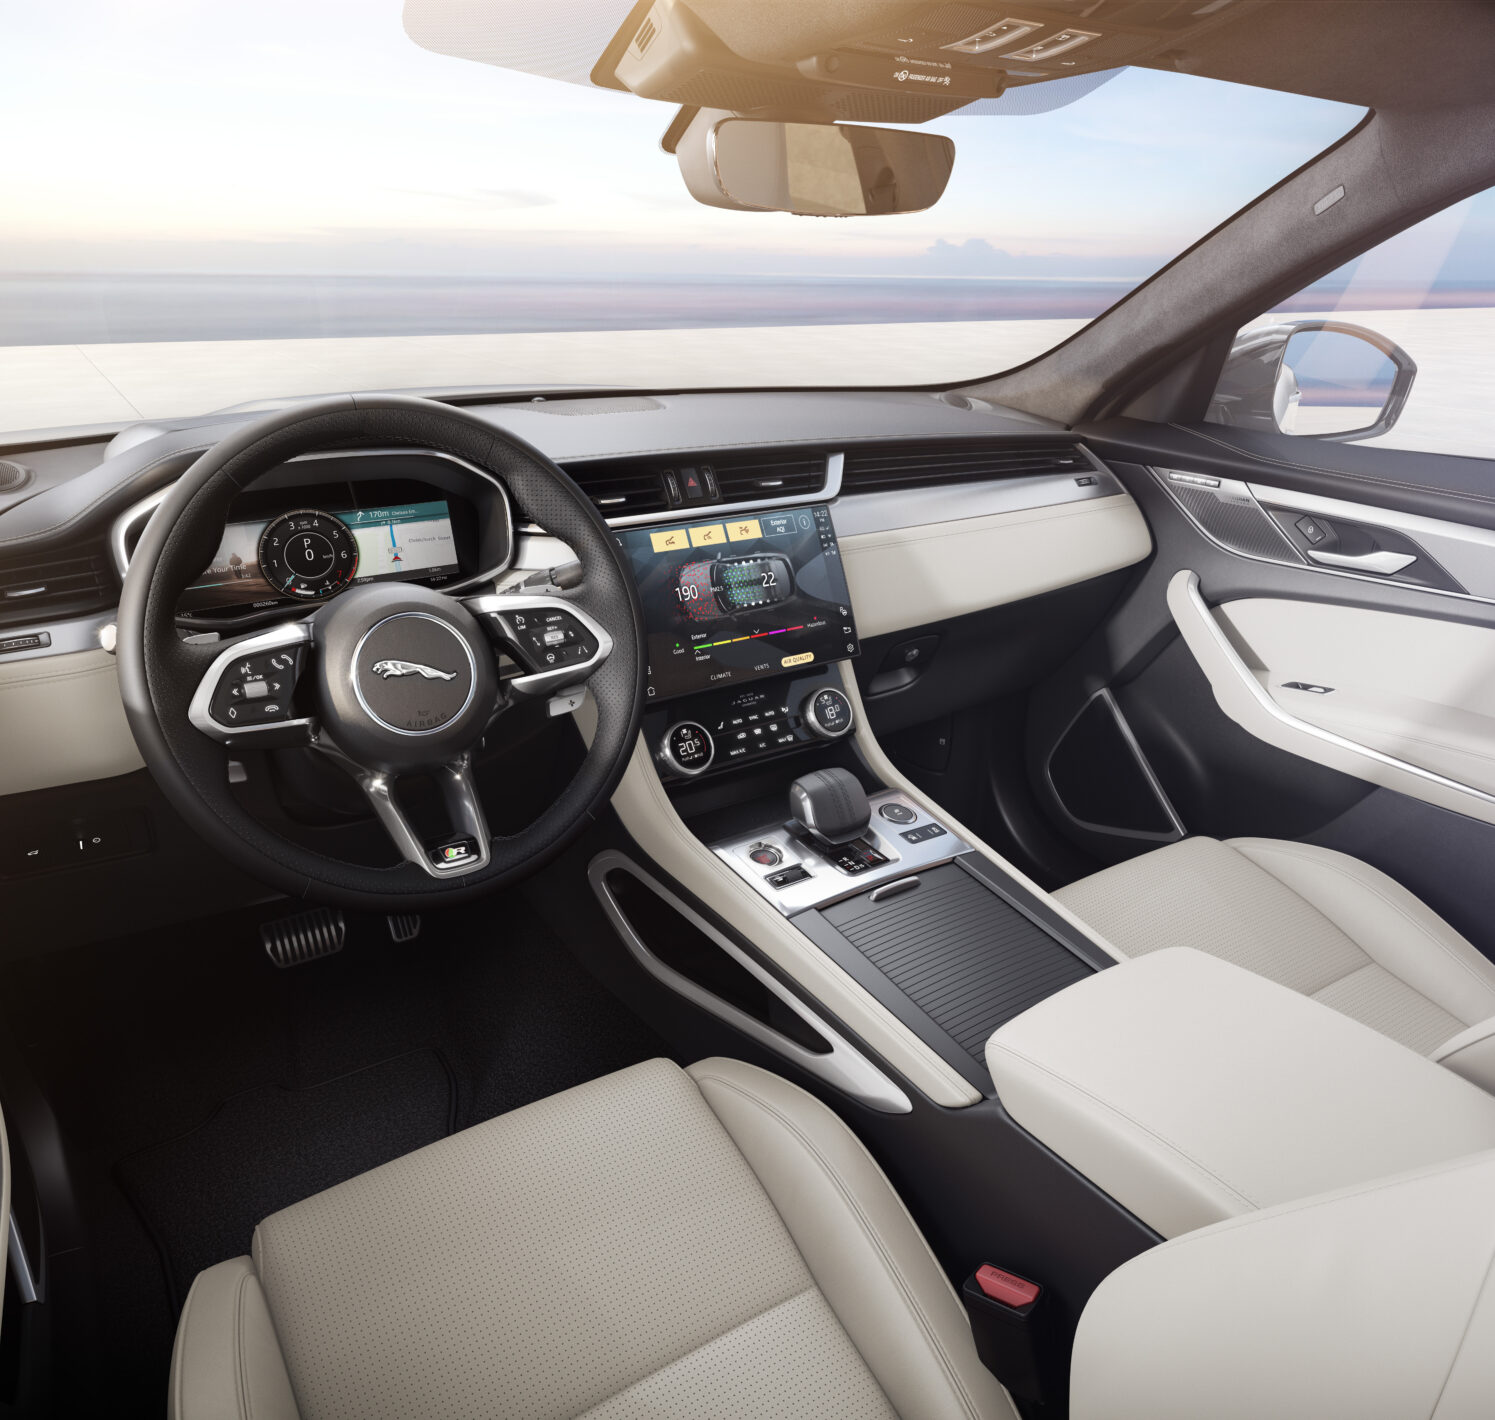 https://autofilter.sk/assets/images/f-pace/gallery/Jag_F-PACE_22MY_04_Light_Oyster_Interior_110821.jpg - obrazok